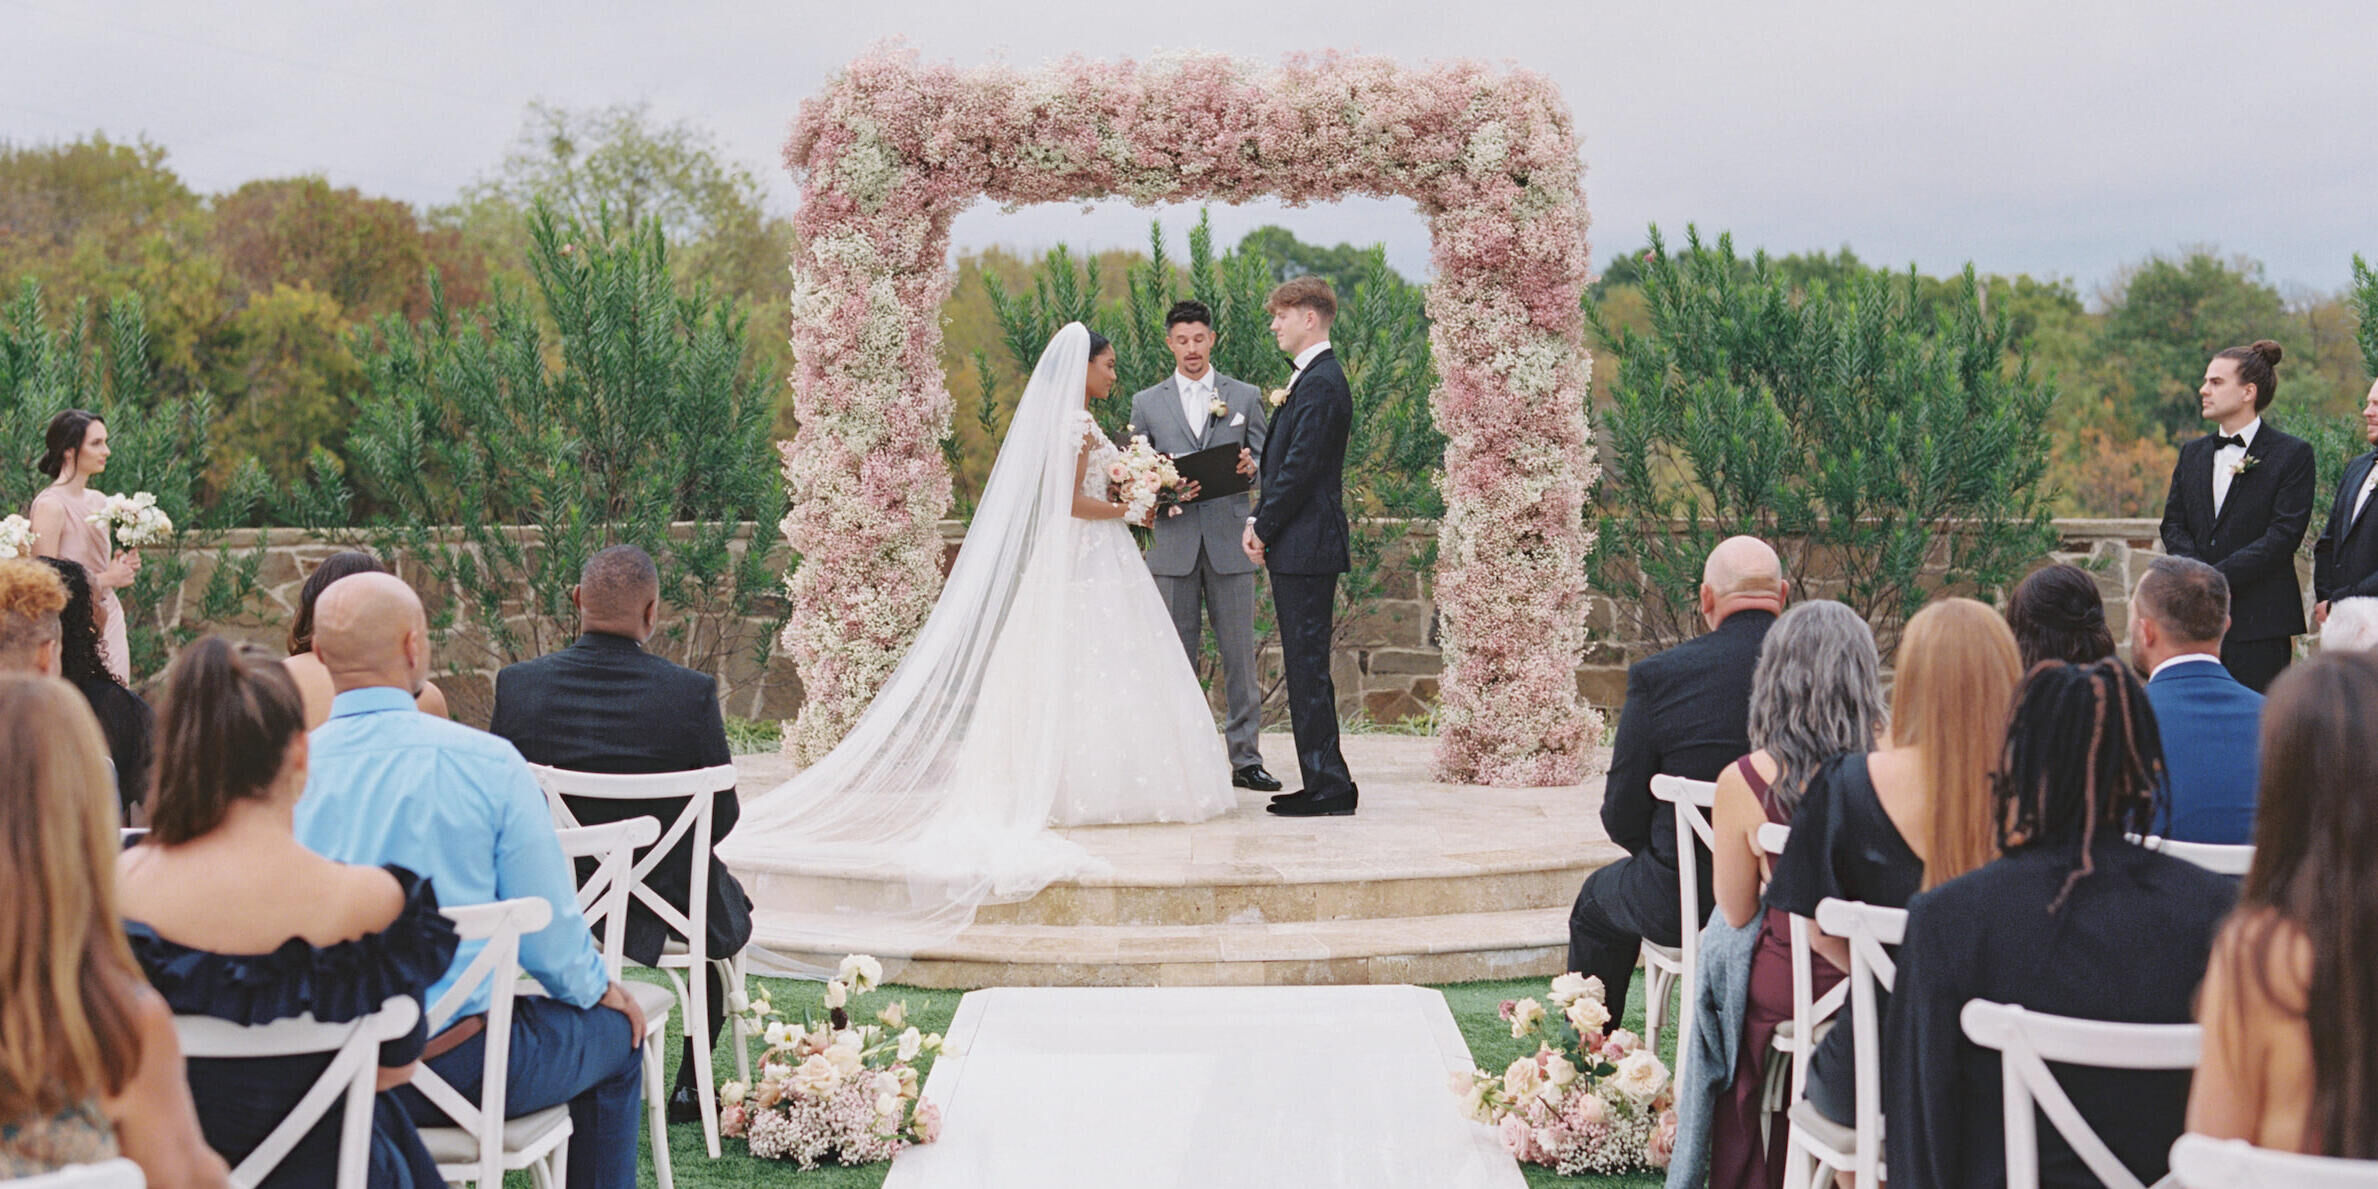 A modern fairytale wedding ceremony, with the bride and groom standing under an arch of pink baby's breath.